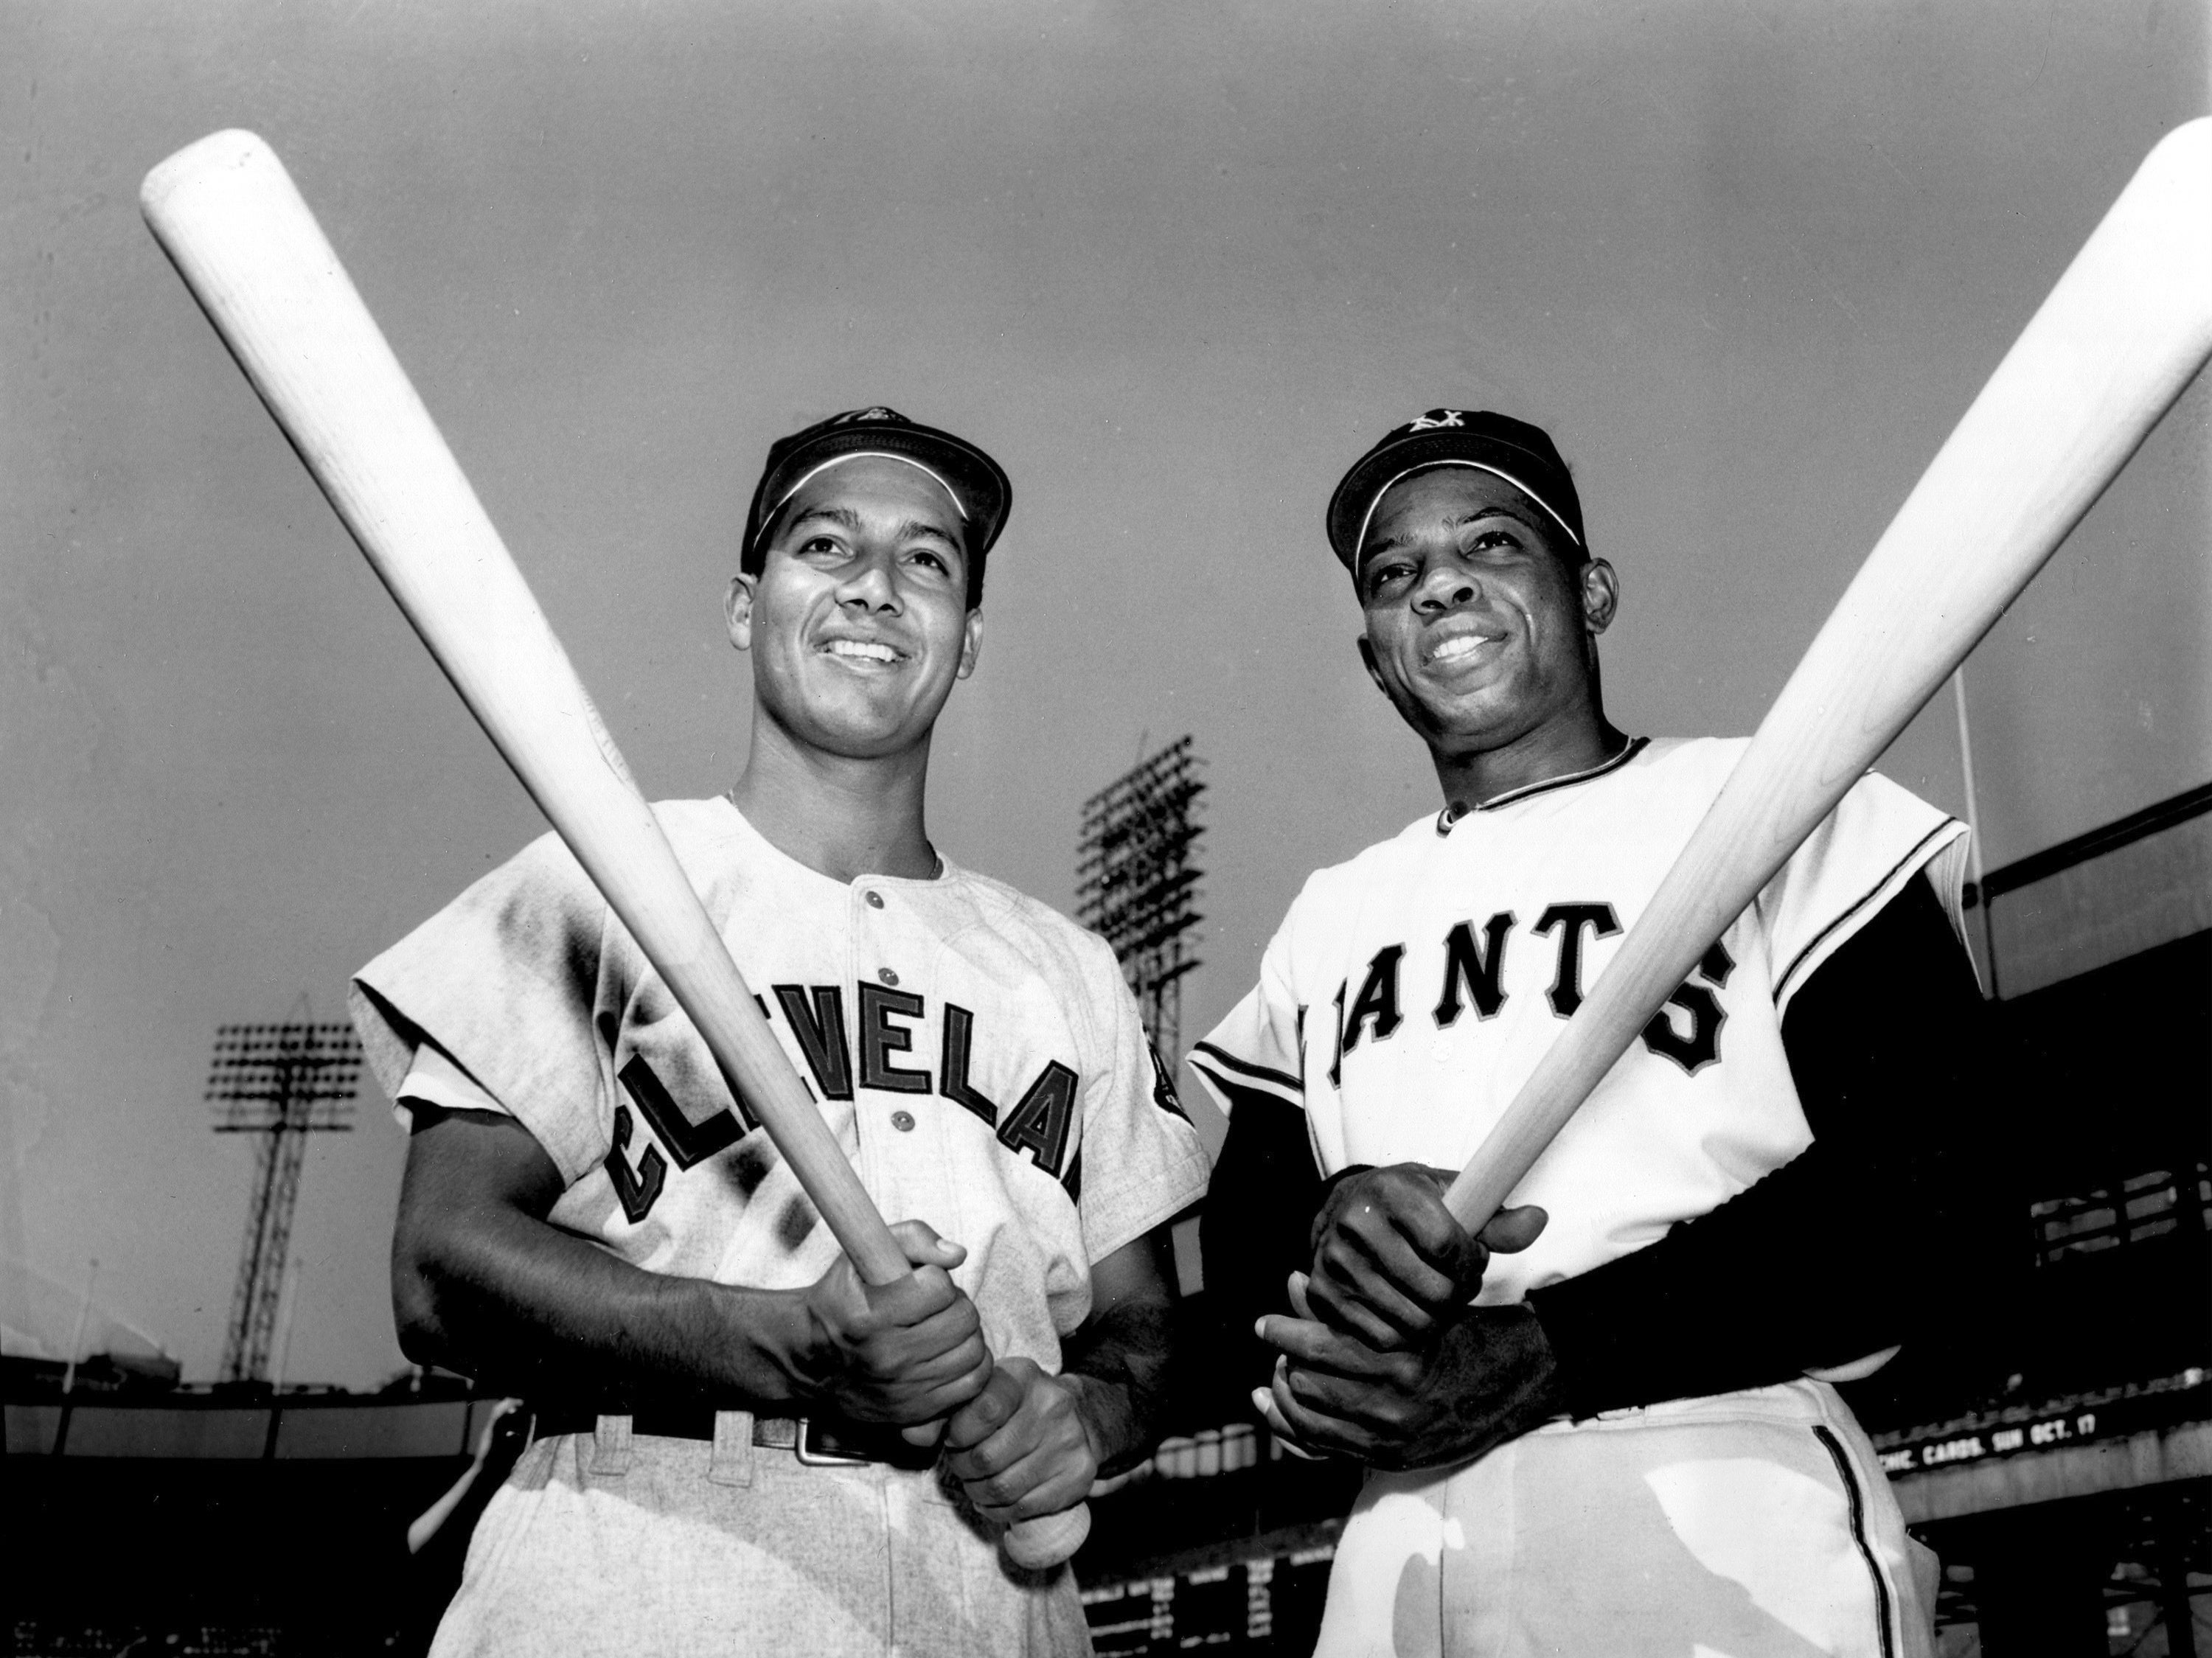 Batting champions Bobby Avila, left, of the Cleveland Indians, and Willie Mays, of the New York Giants, pose with their bats at the Polo Grounds in New York on Sept 28, 1954